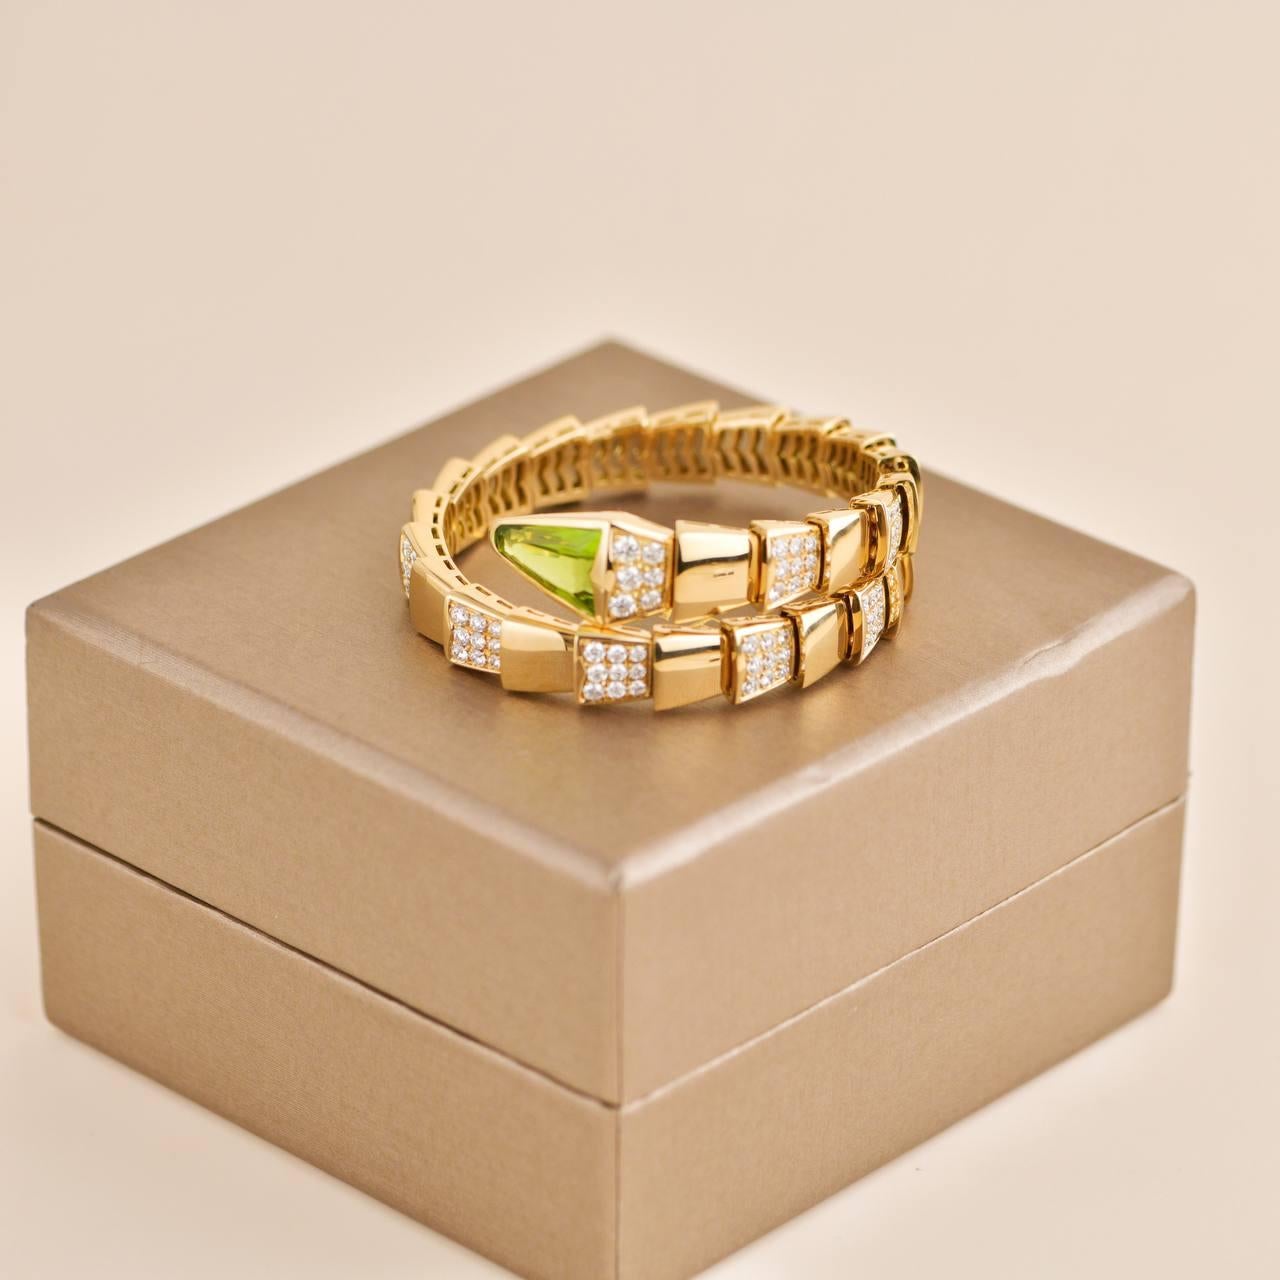 SKU	CT-2103
Comes With	Box Only
Model	Serpenti
Serial Number	A8R***
Metal	18k Yellow Gold
Stones	Diamond, Peridot
Main Stone Weight	5.4ct approx
Weight	61 g
______________________________________________________________
Condition	Excellent / Wear